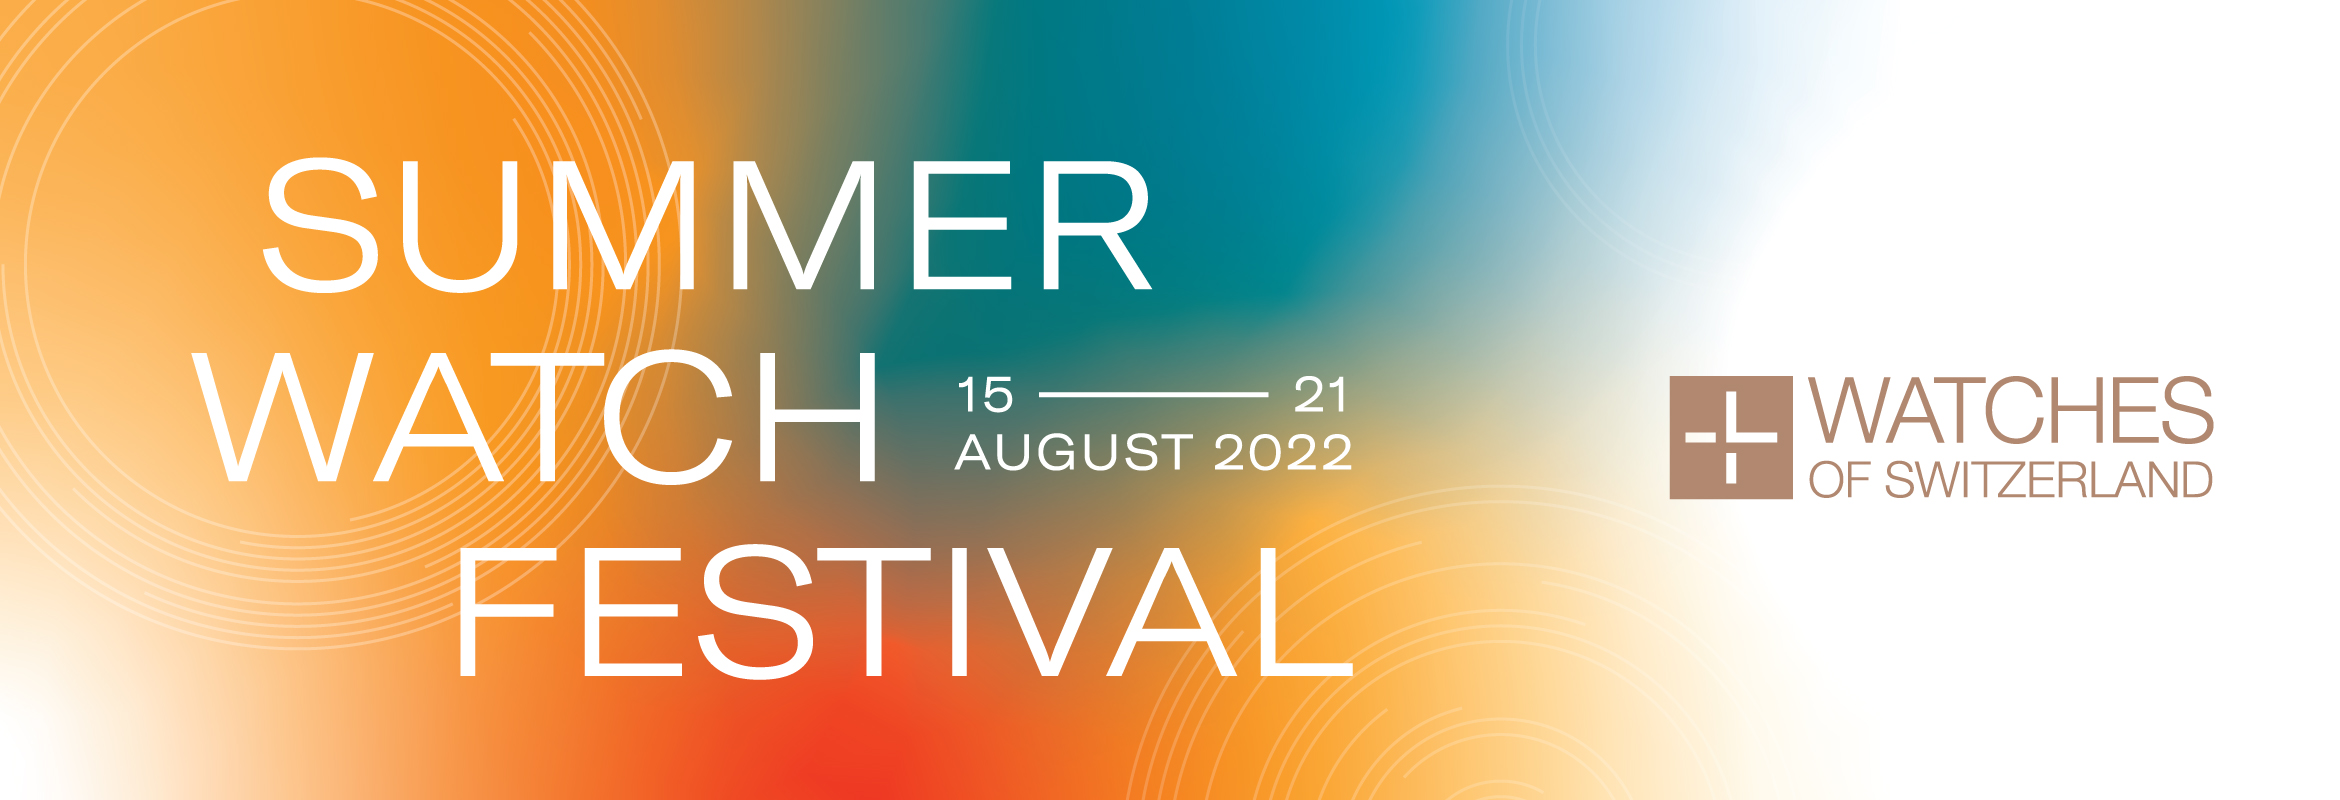 Our Highlights from the Summer Watch Festival